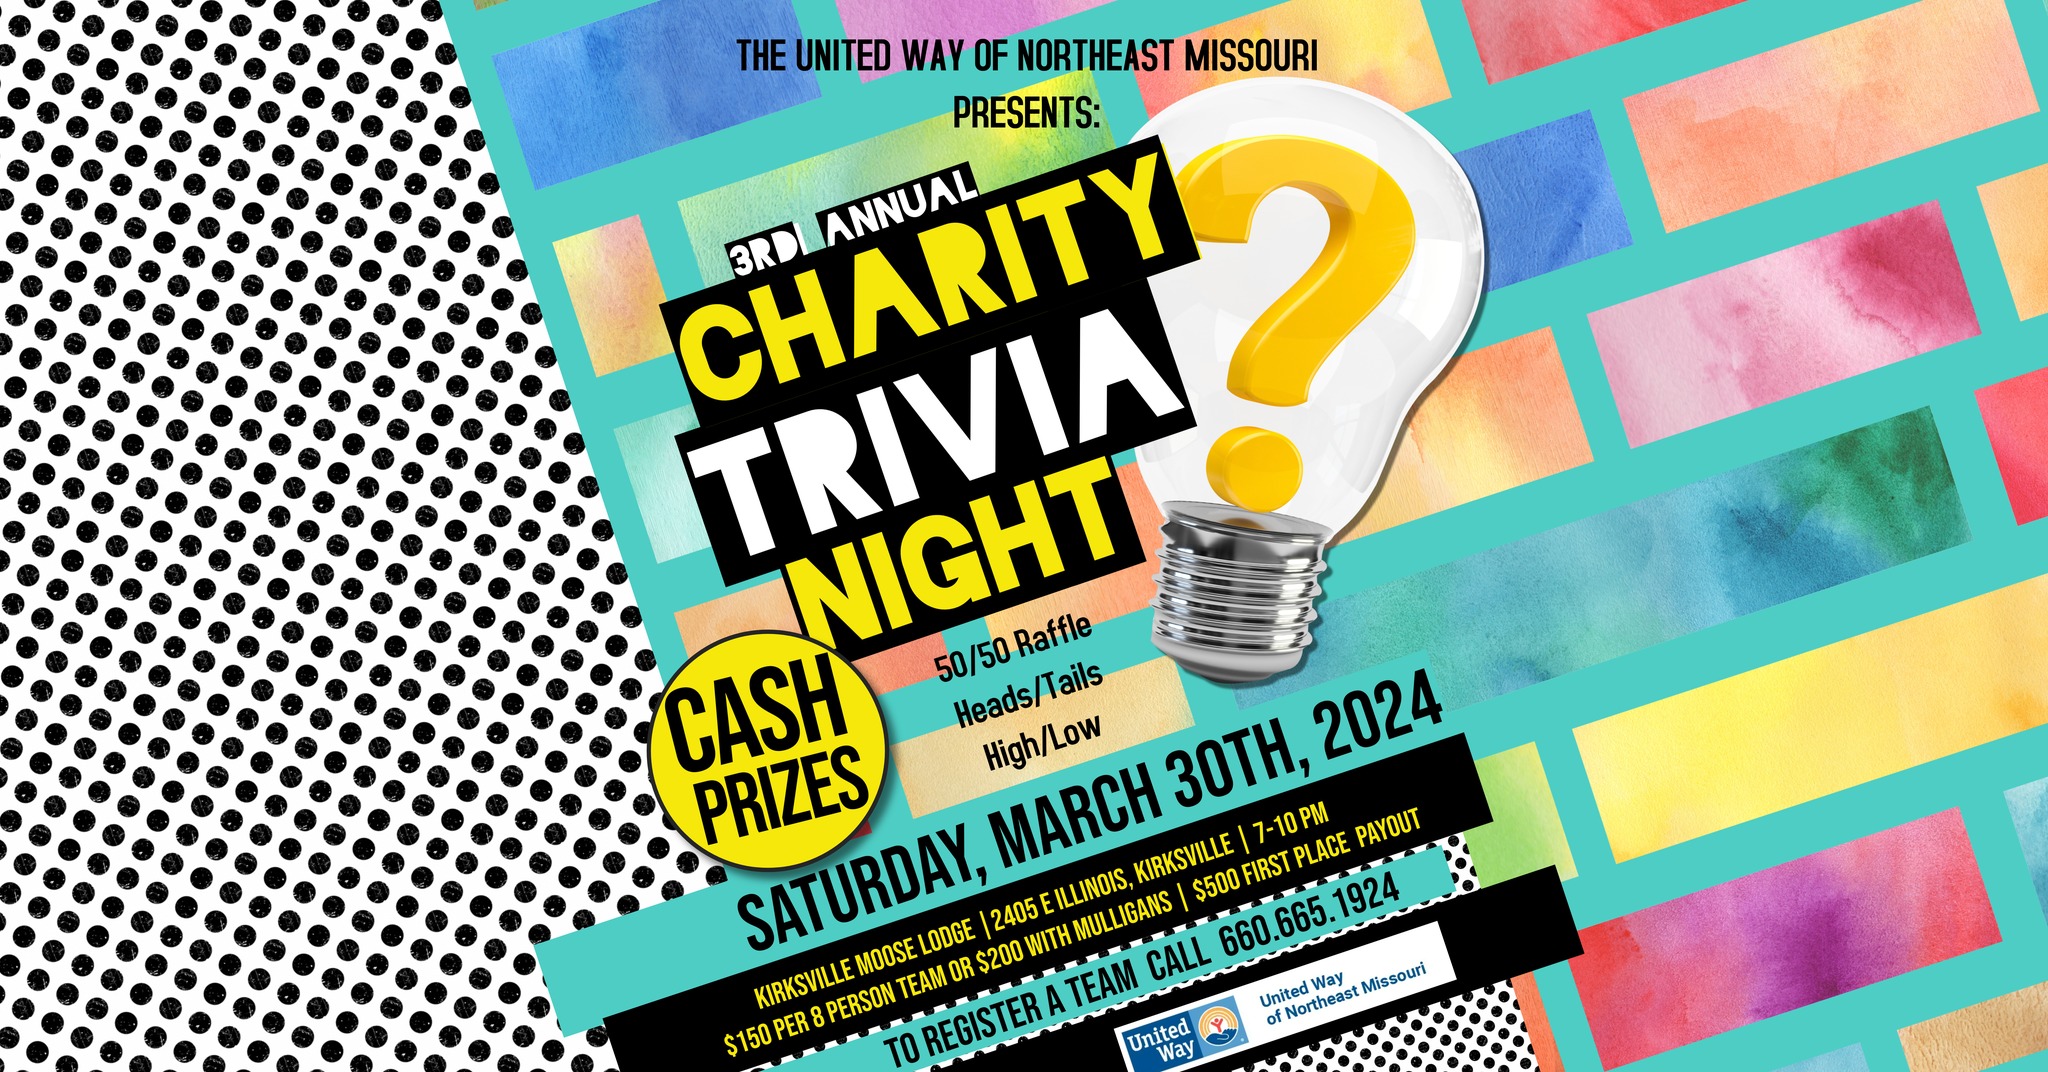 Check more about 3rd Annual Charity Trivia Night